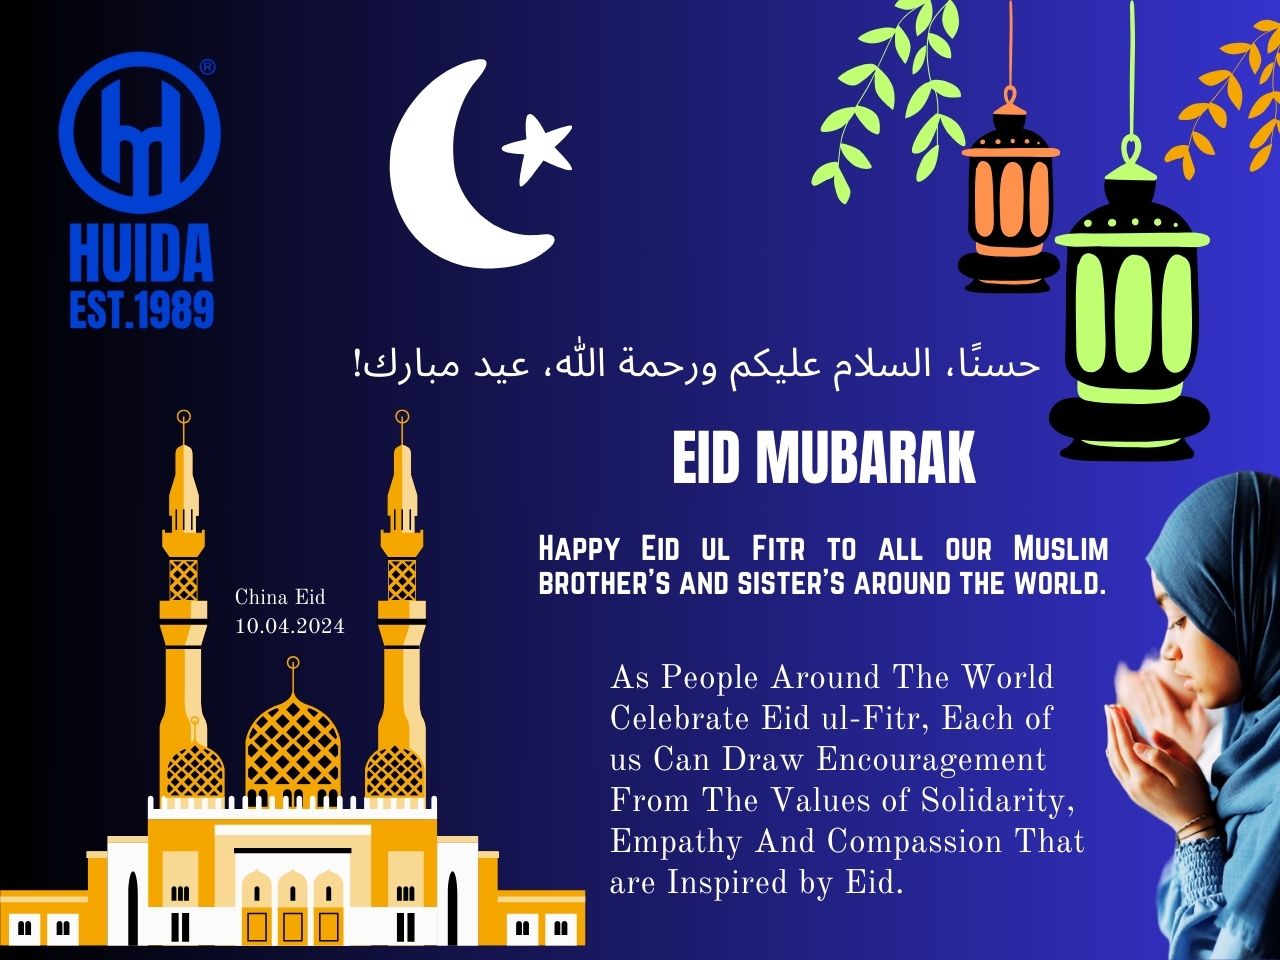 As People Around The World Celebrate Eid ul-Fitr, Each of us Can Draw Encouragement From The Values of Solidarity, Empathy And Compassion That are Inspired by Eid..jpg